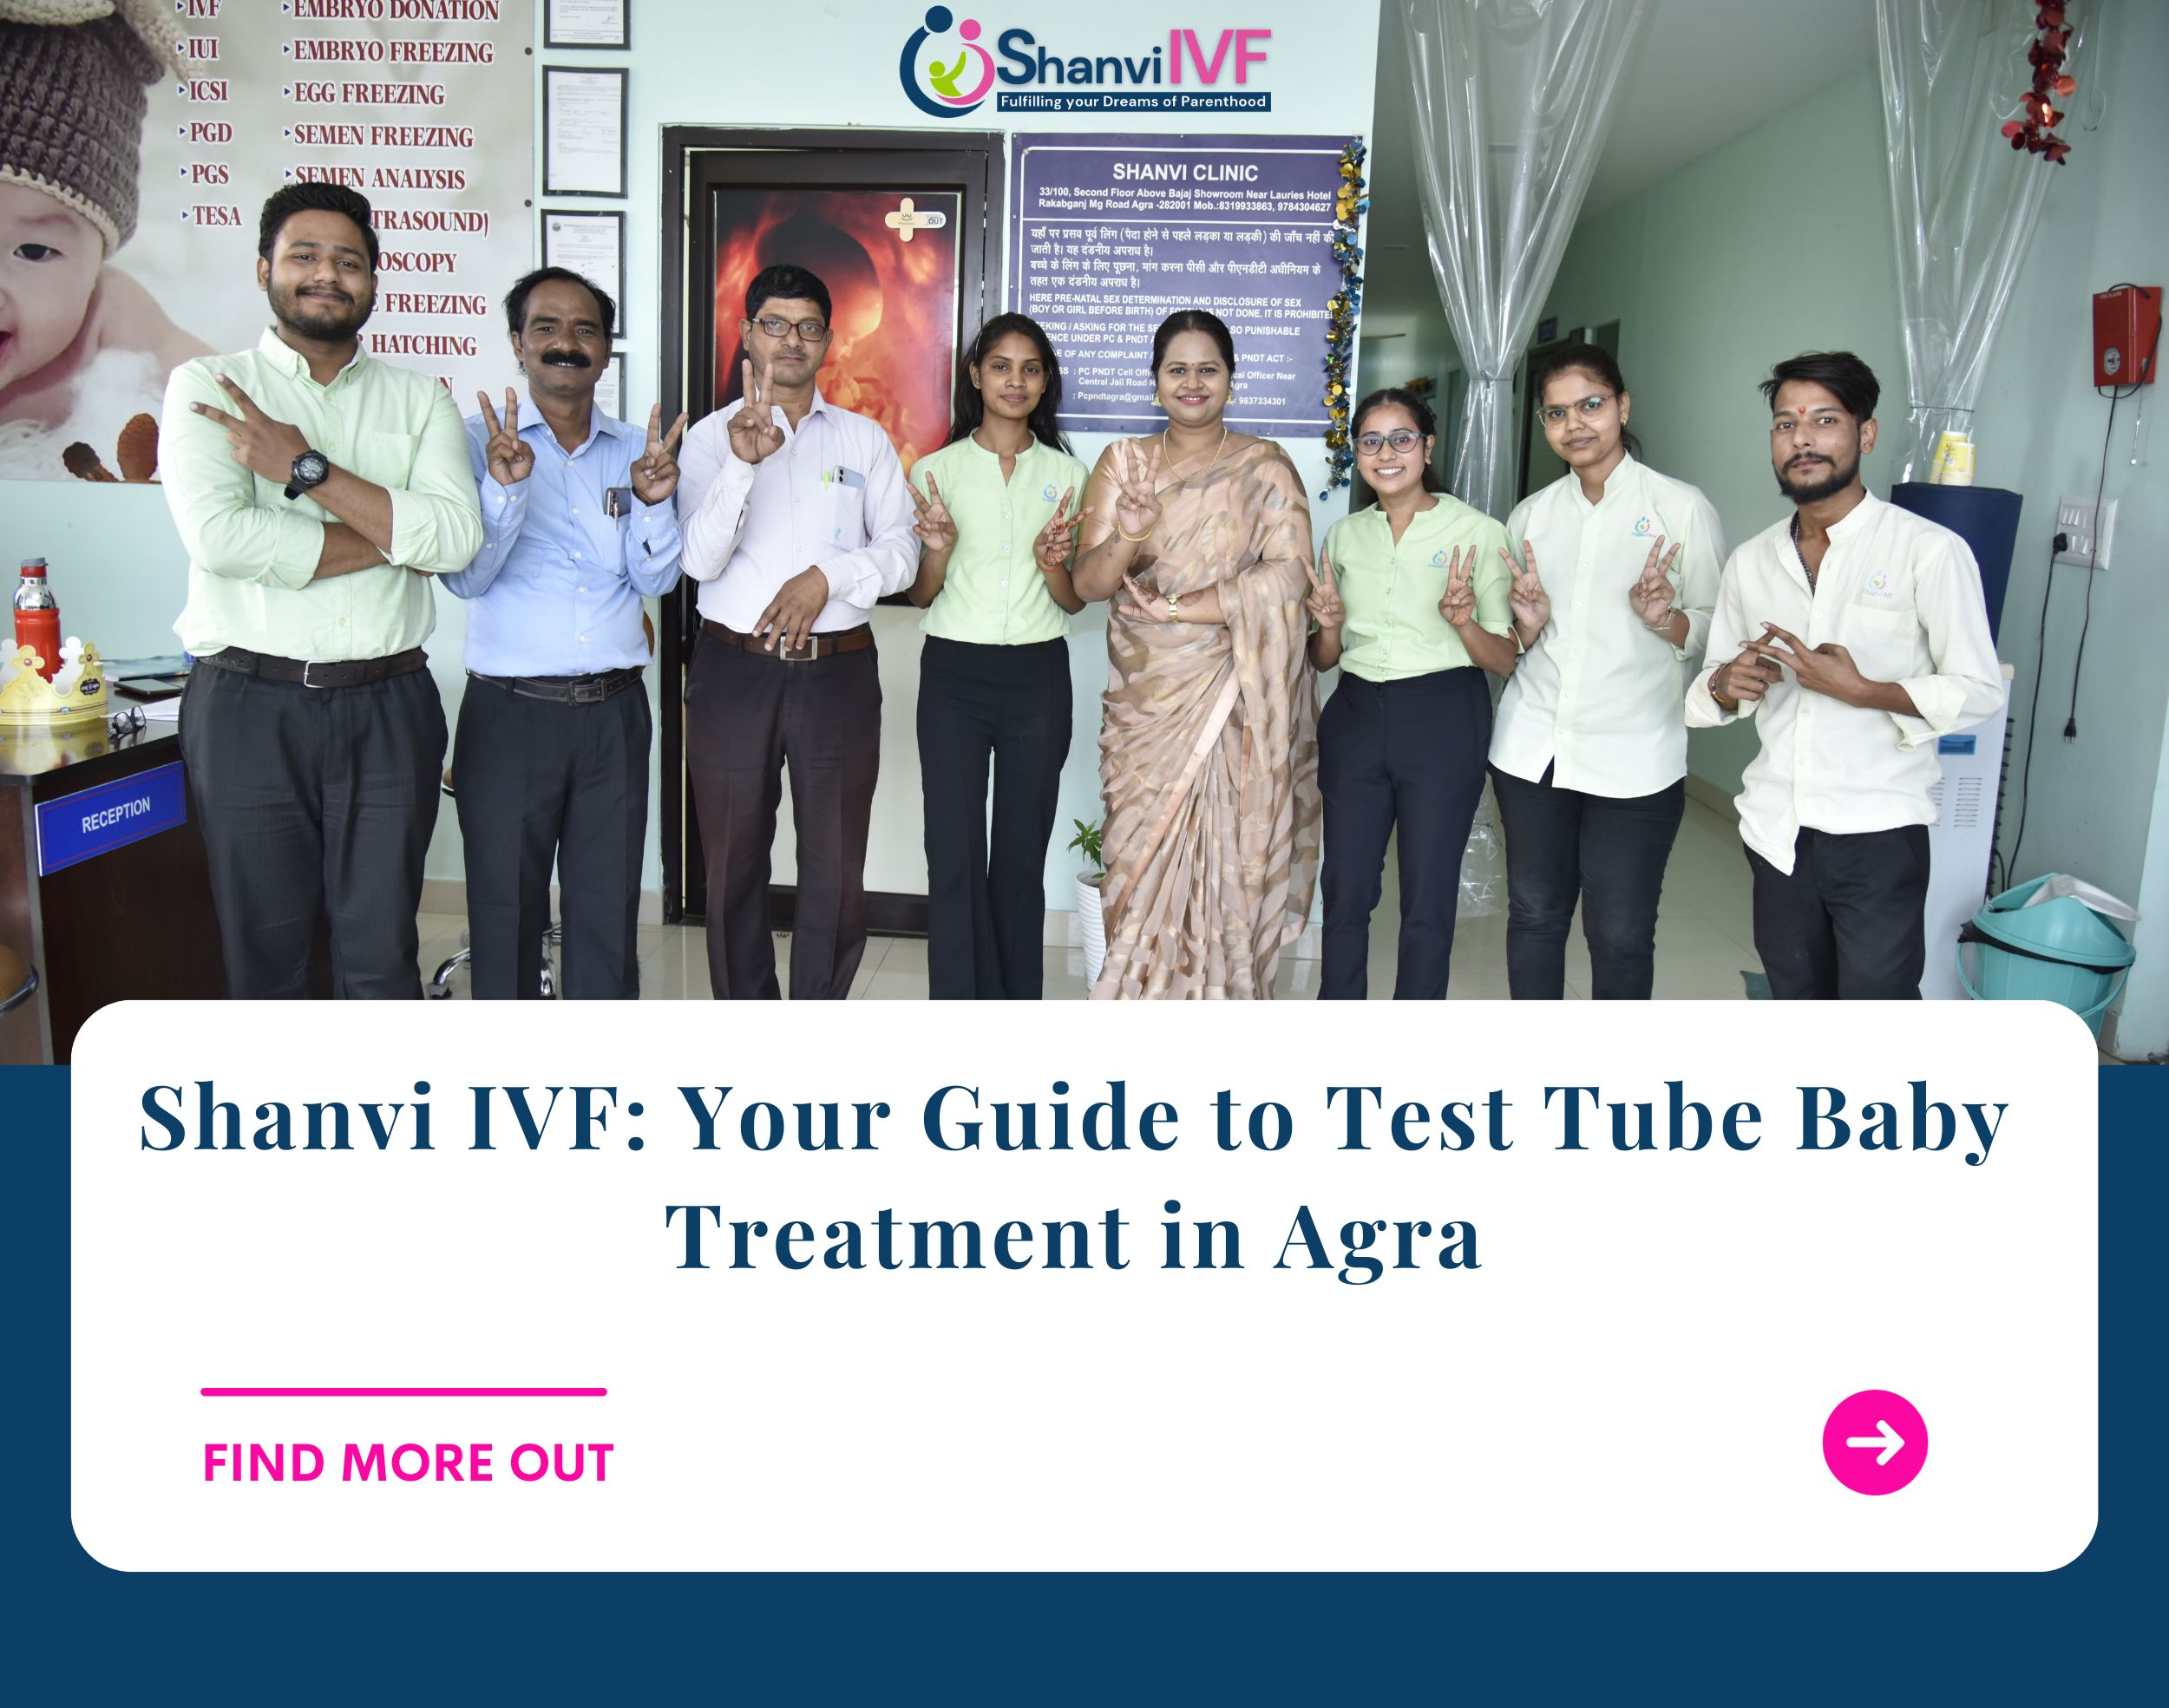 Shanvi IVF: Your Guide to Test Tube Baby Treatment in Agra